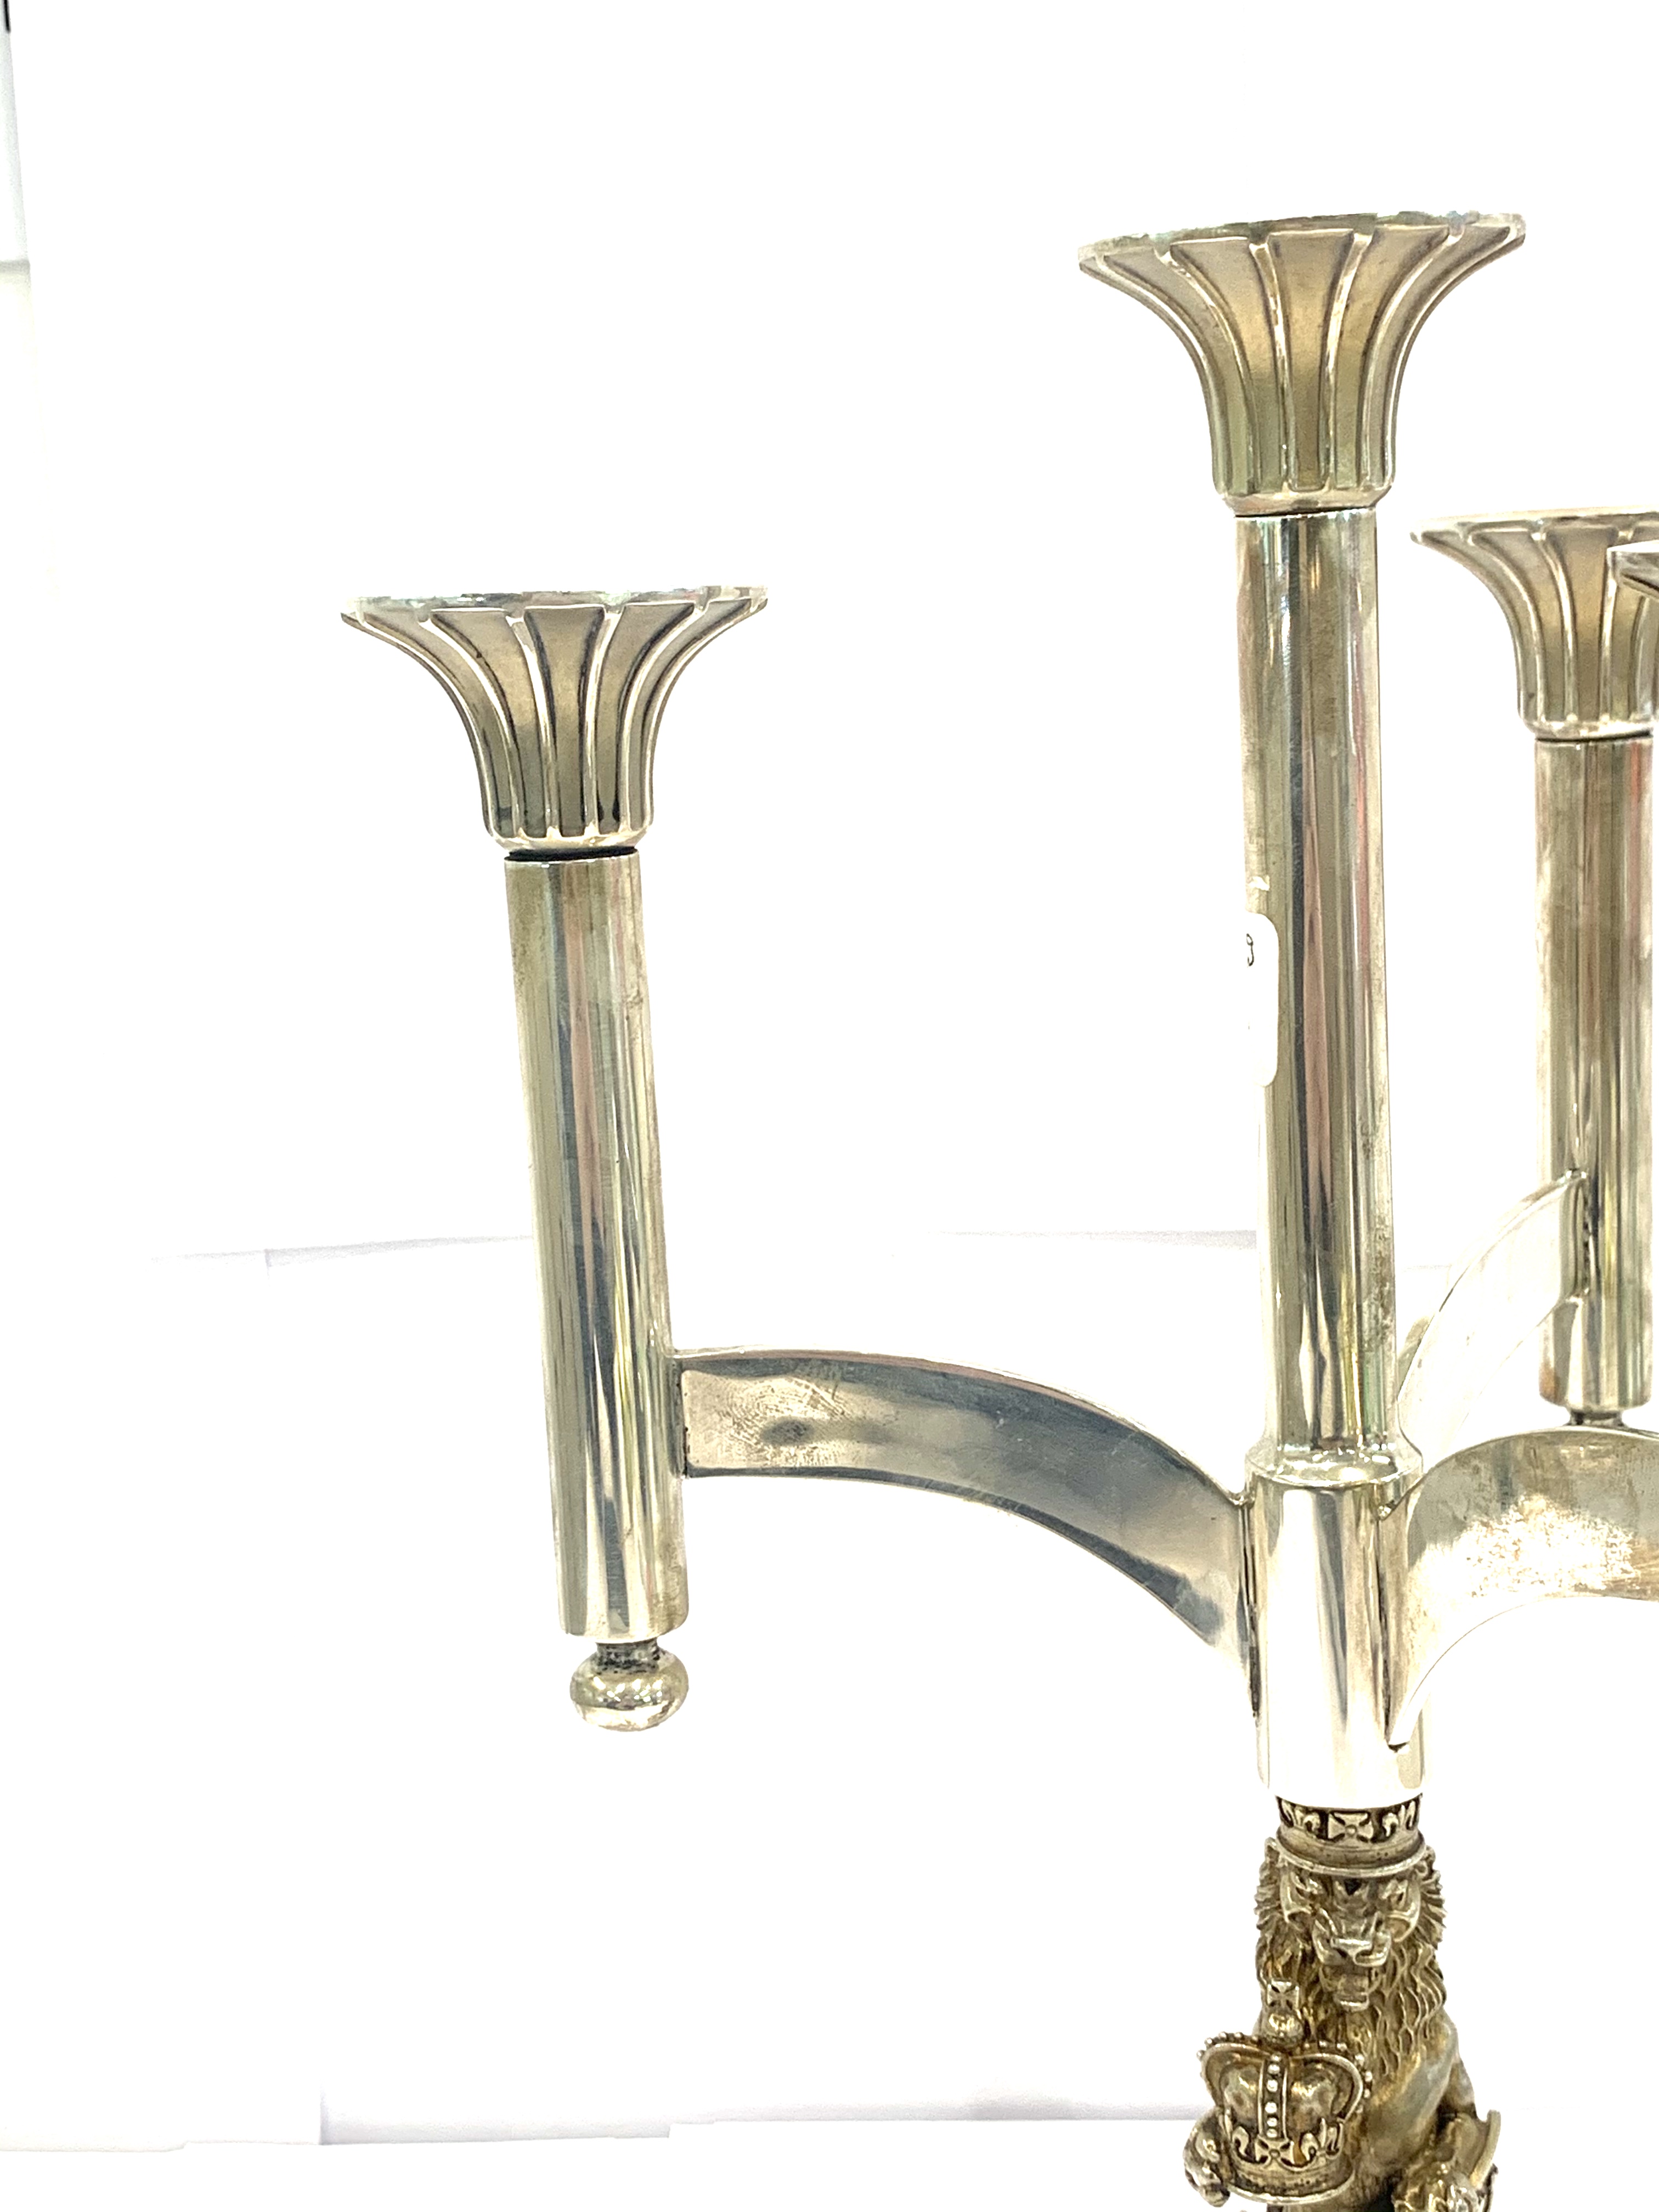 A limited edition Silver Candelabrum produced by Aurum to commemorate the 1977 Royal Silver Jubilee, - Image 6 of 7